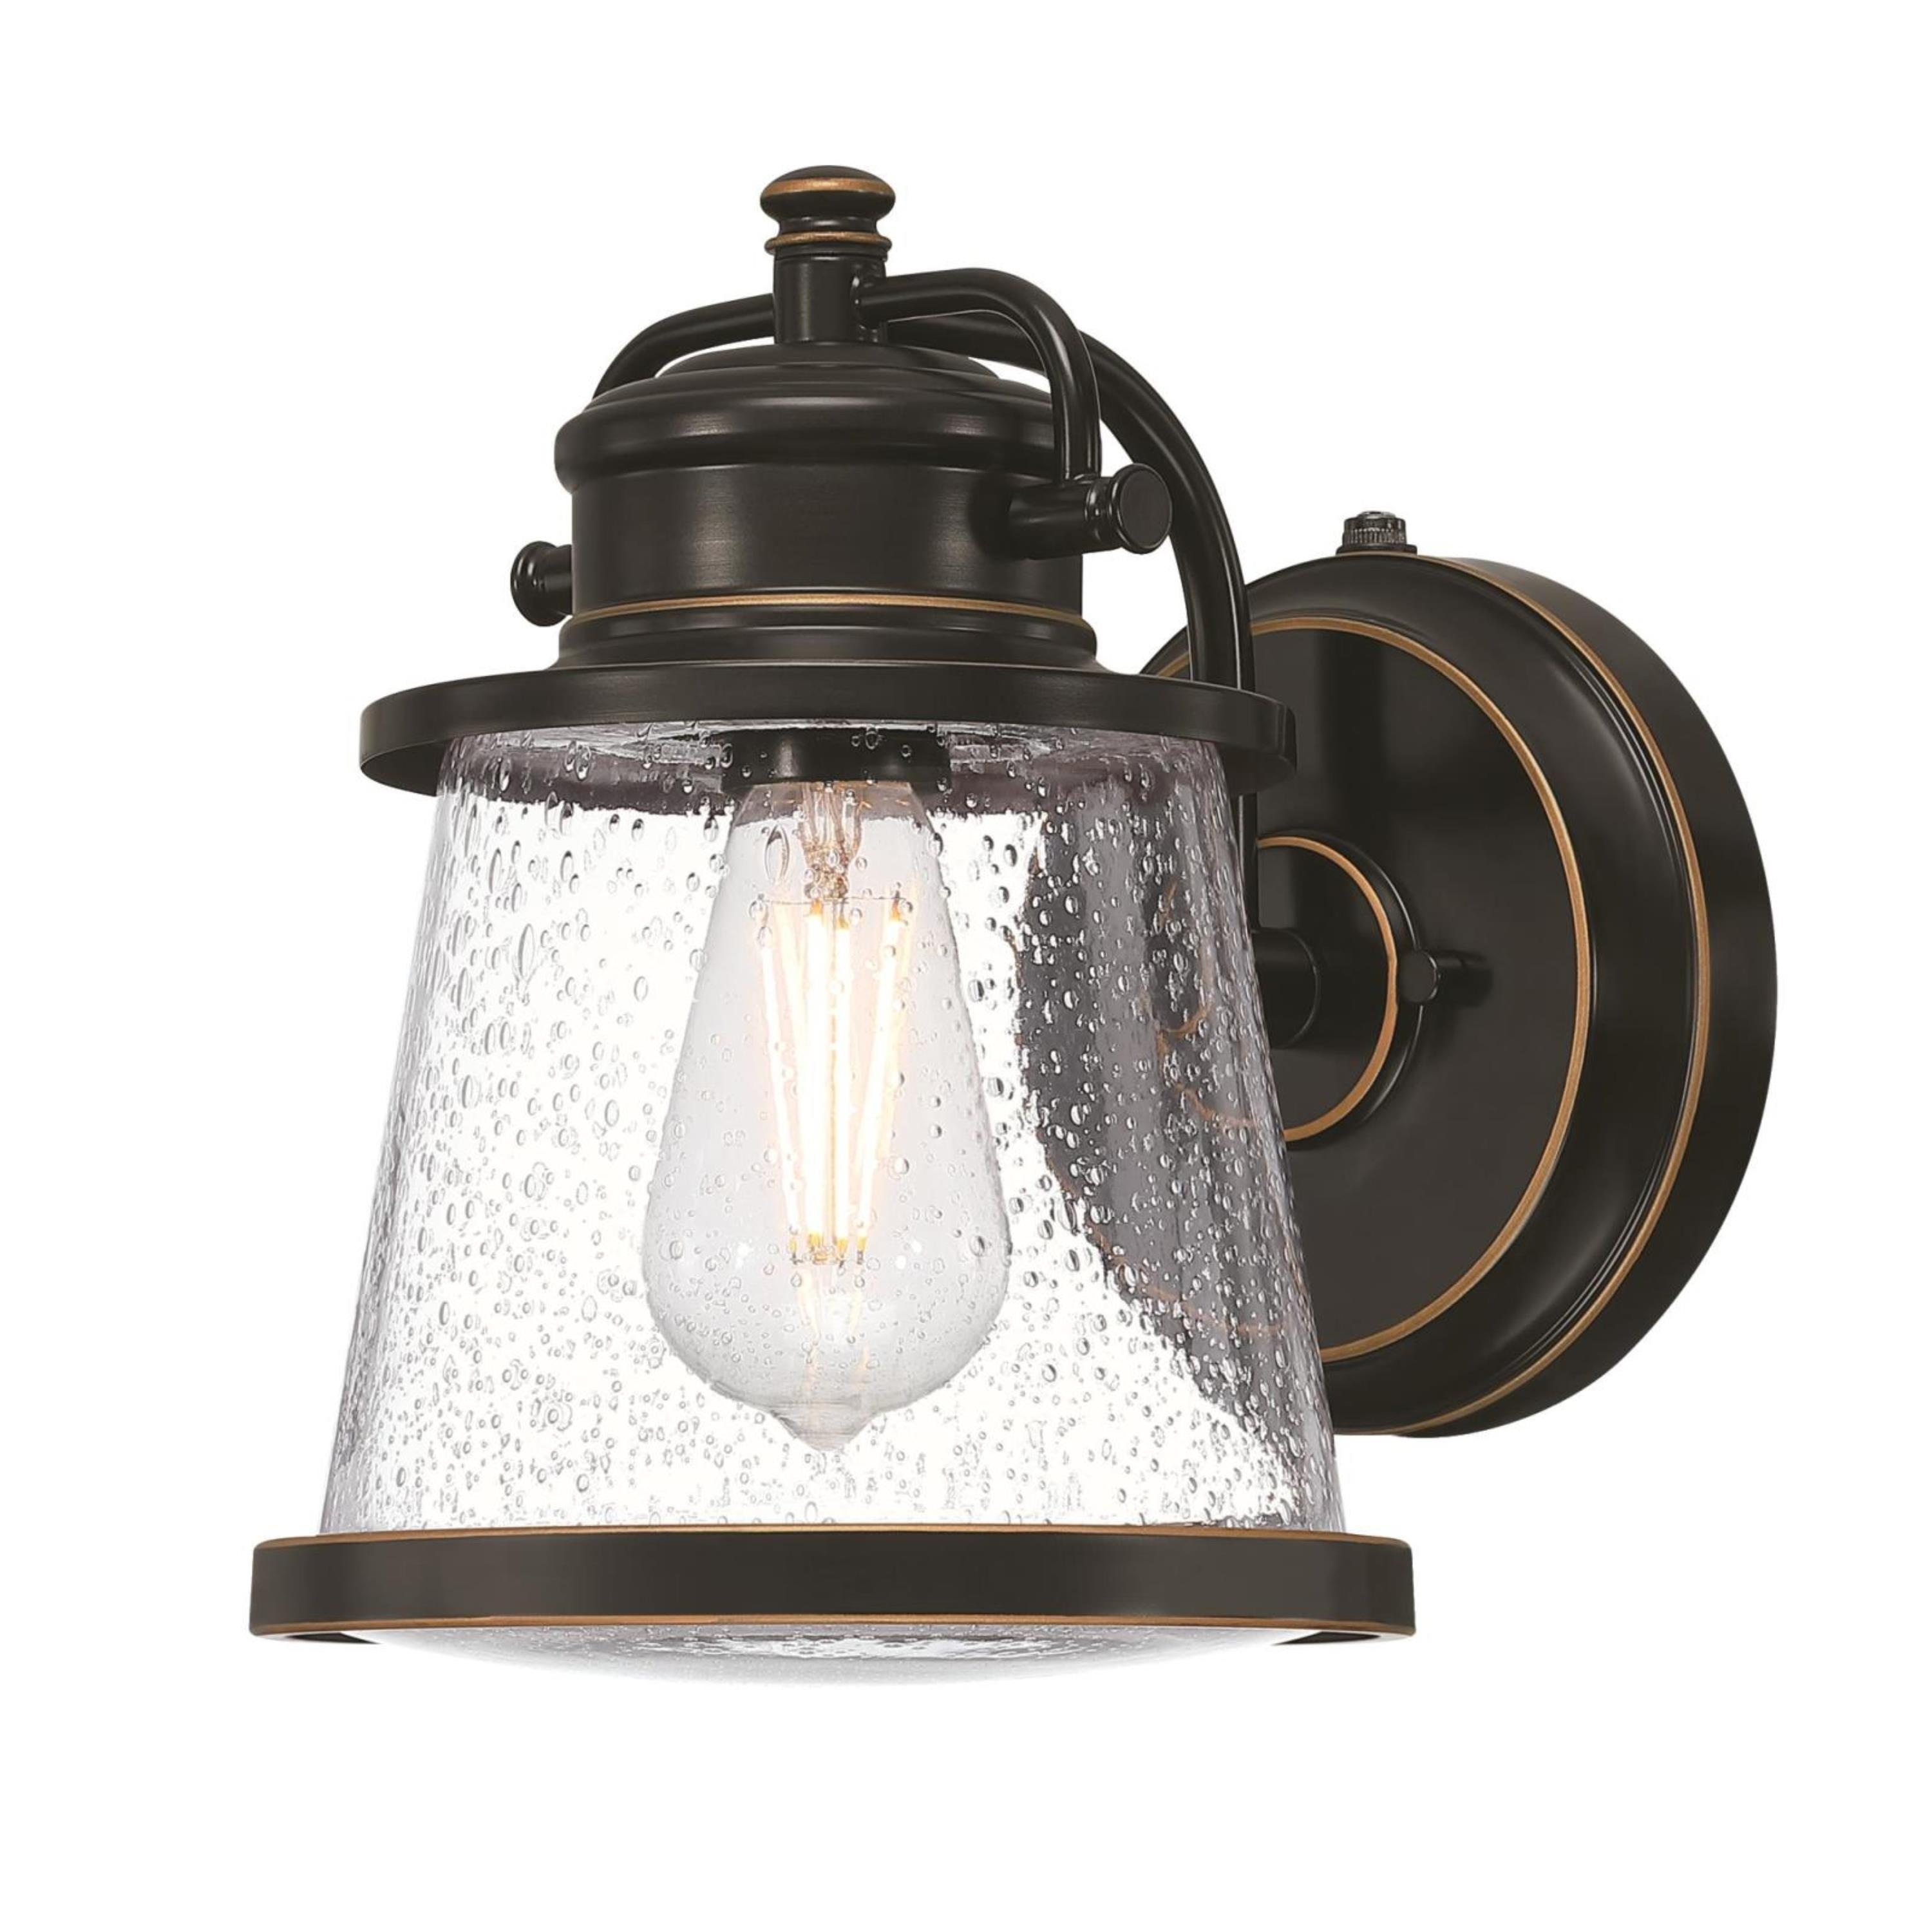 Westinghouse Westinghouse Lighting 6121500 Emma Jane Vintage-Style One Light Outdoor Wall Fixture with Dusk to Dawn Sensor, Amber Bronze Finish, Clear Seeded Glass - image 2 of 5